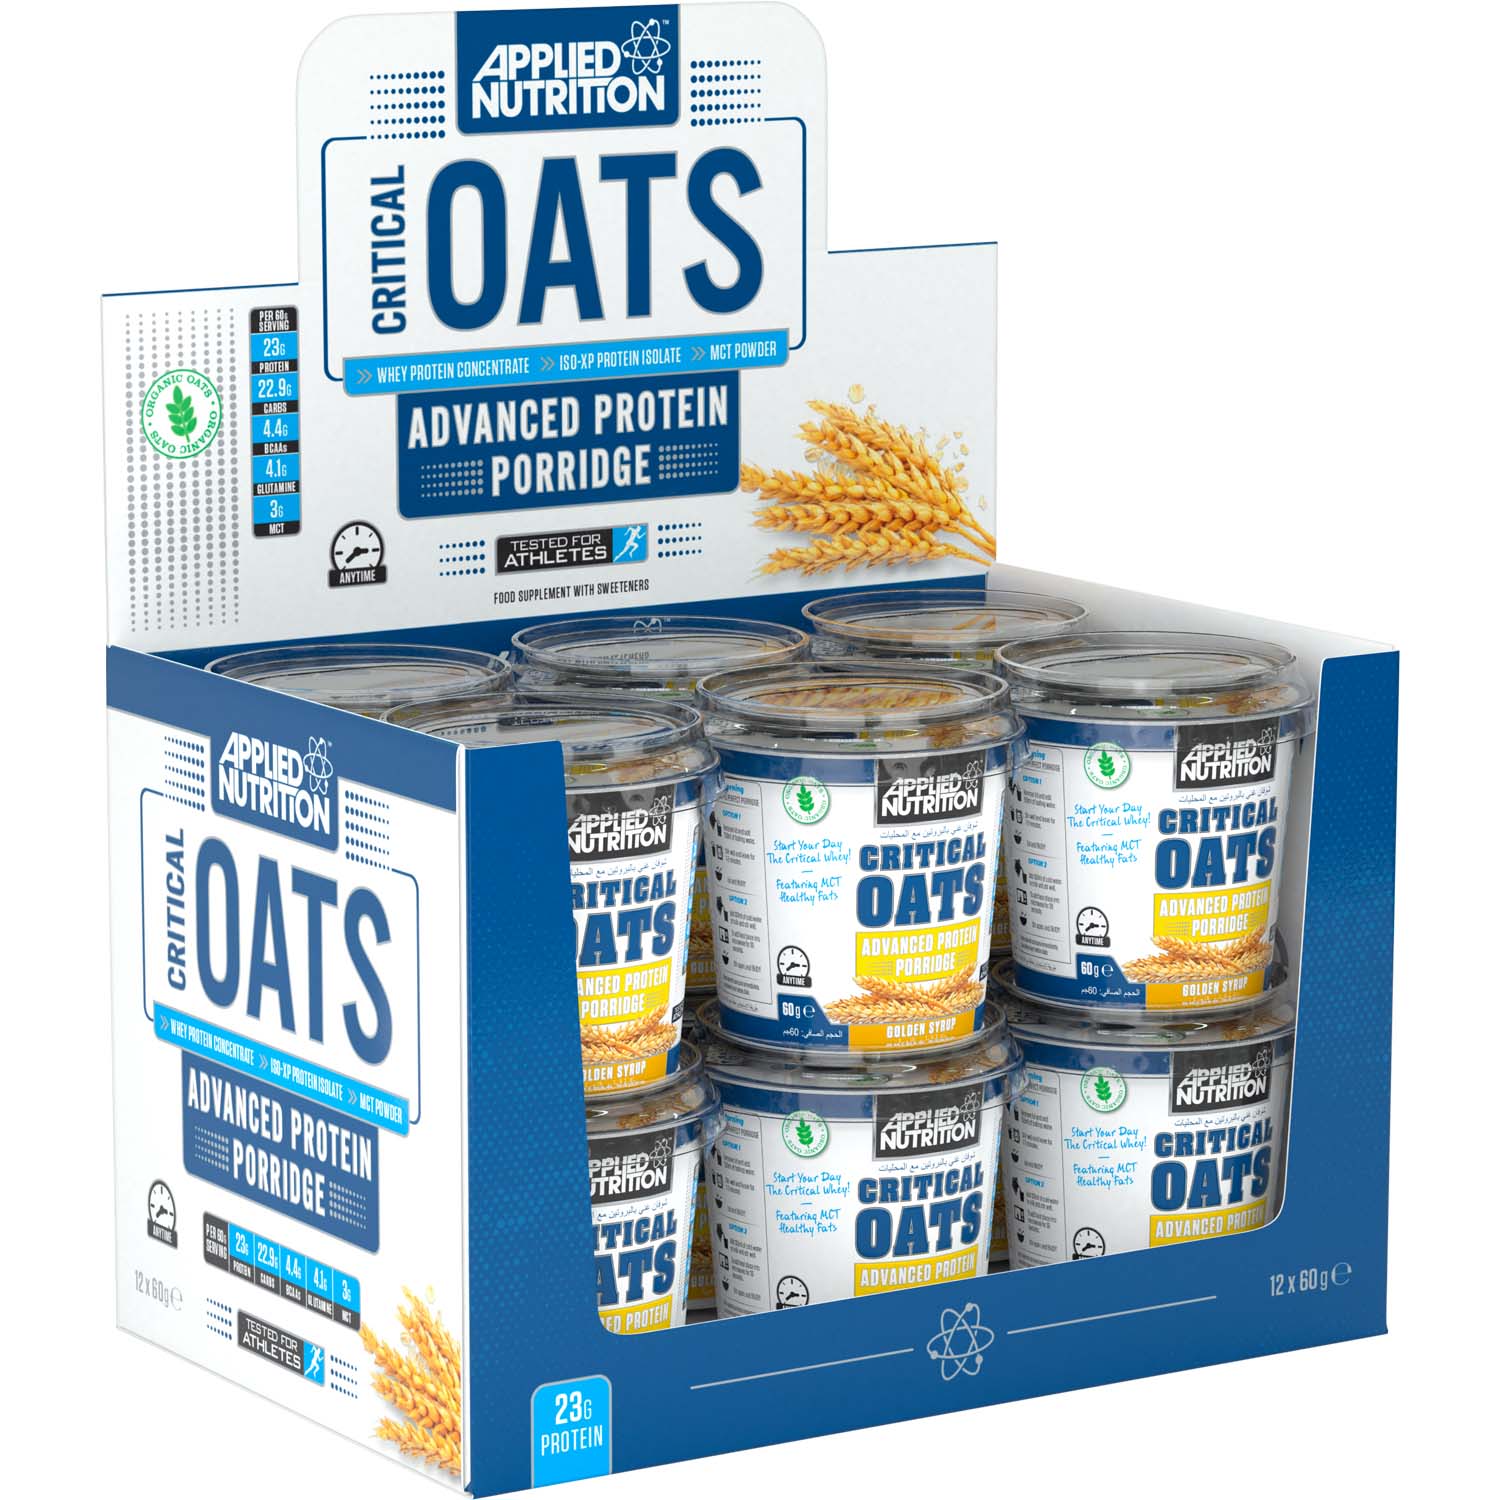 Applied Nutrition Critical Oats, Golden Syrup, Box of 12 Pieces